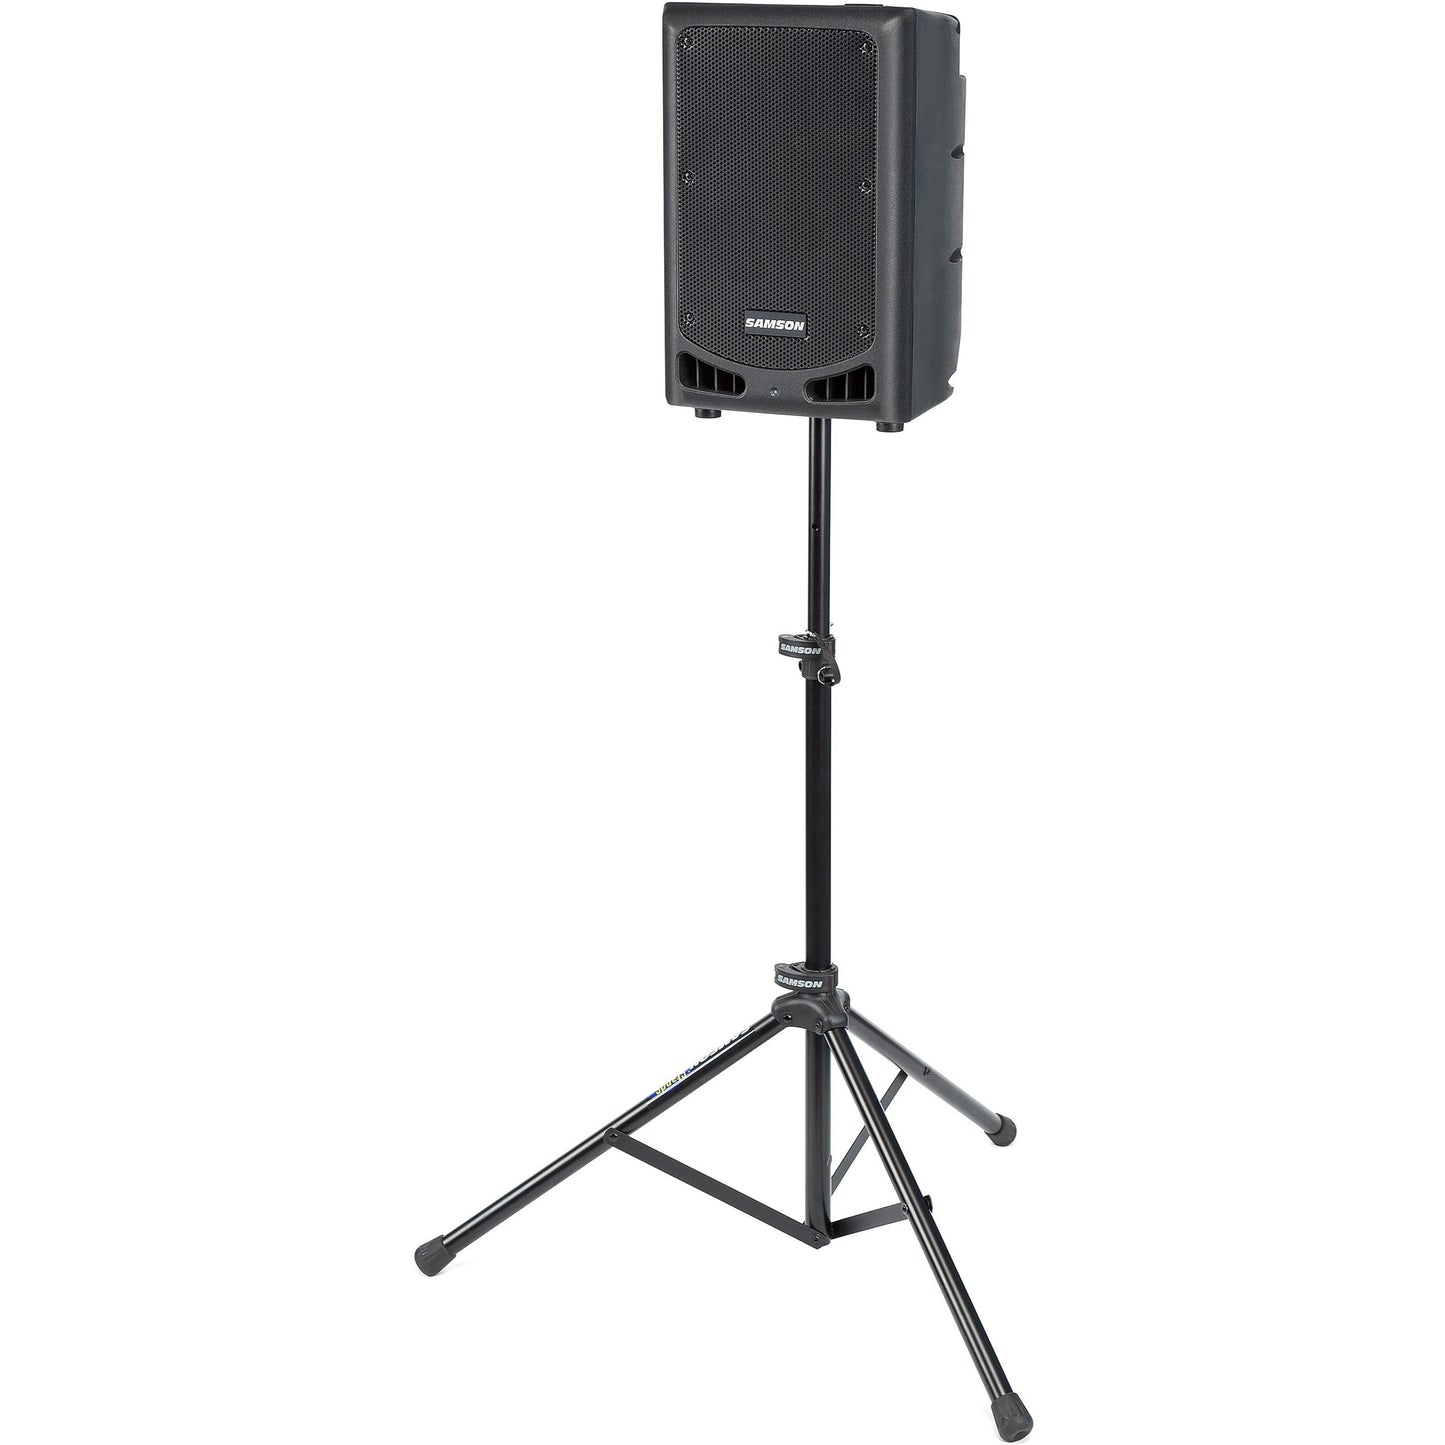 Samson Expedition XP208w Rechargeable PA System